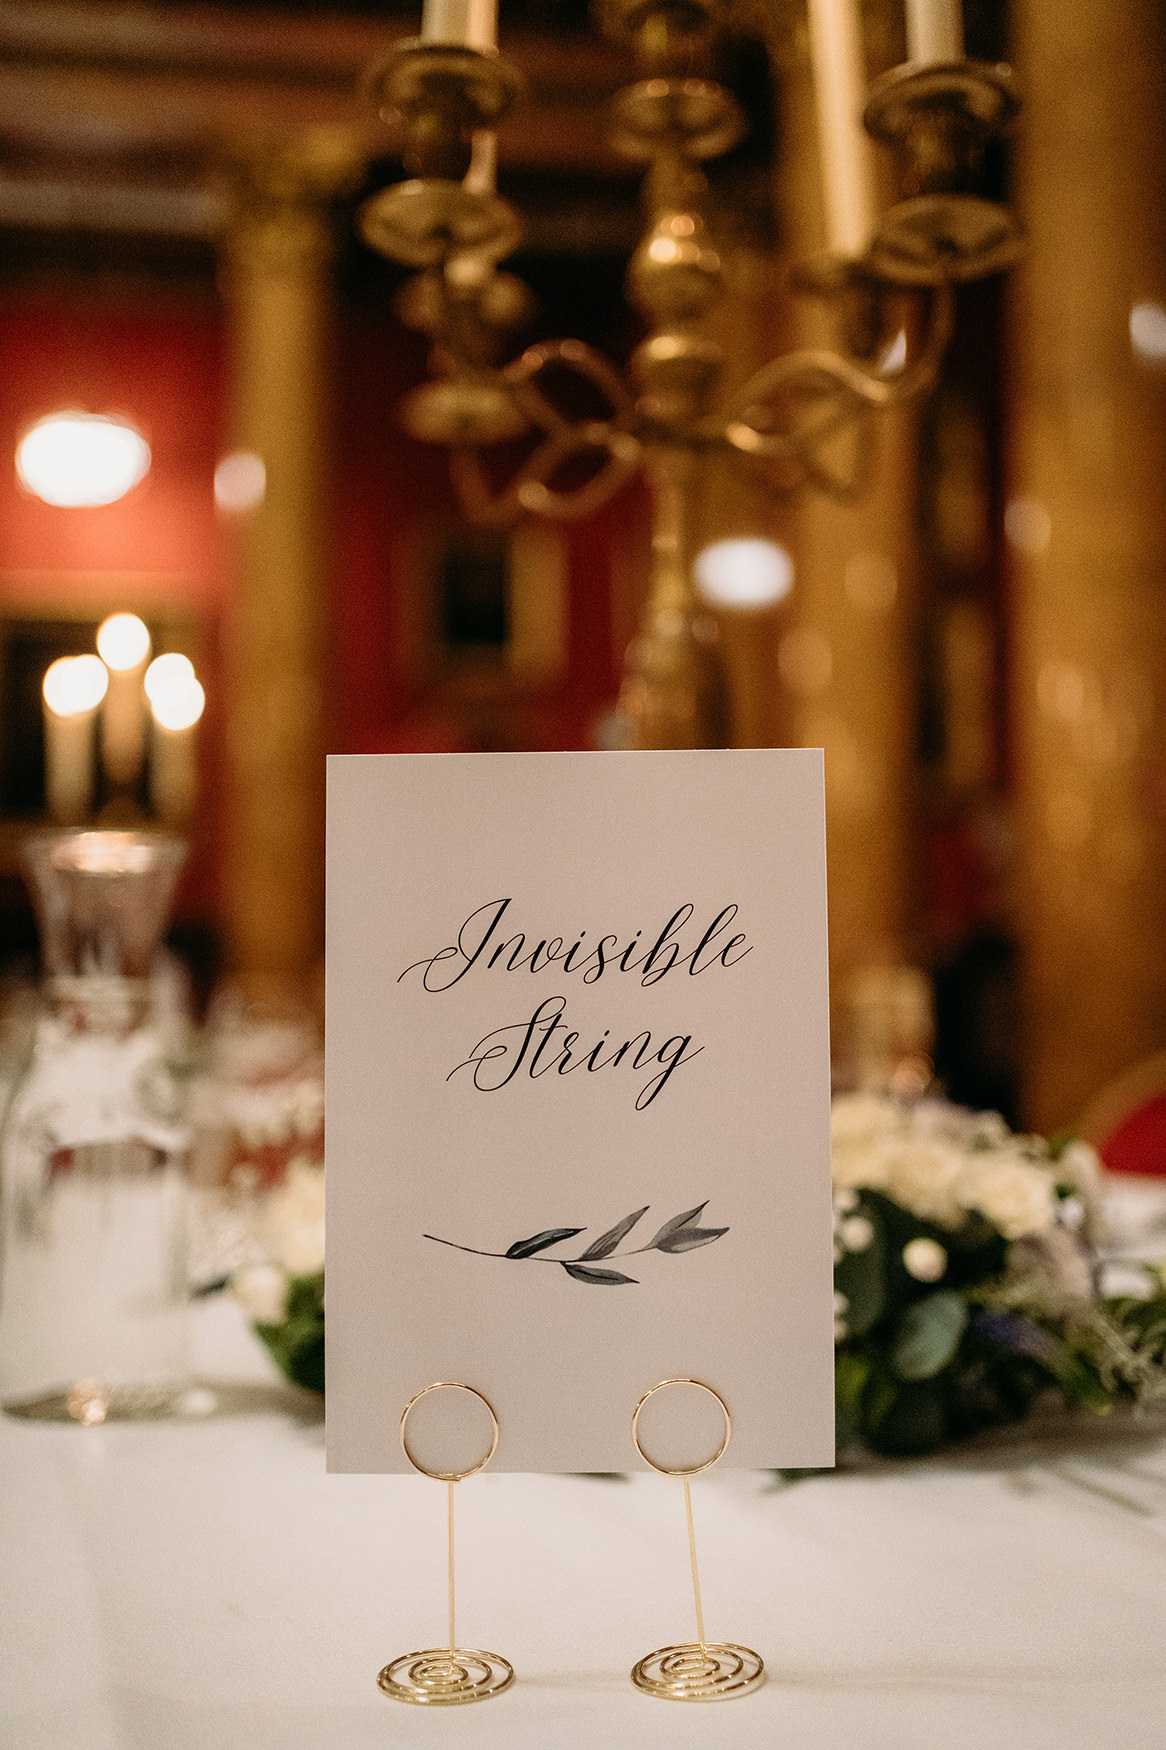 Taylor Swift table names at Royal College of Physicians Wedding